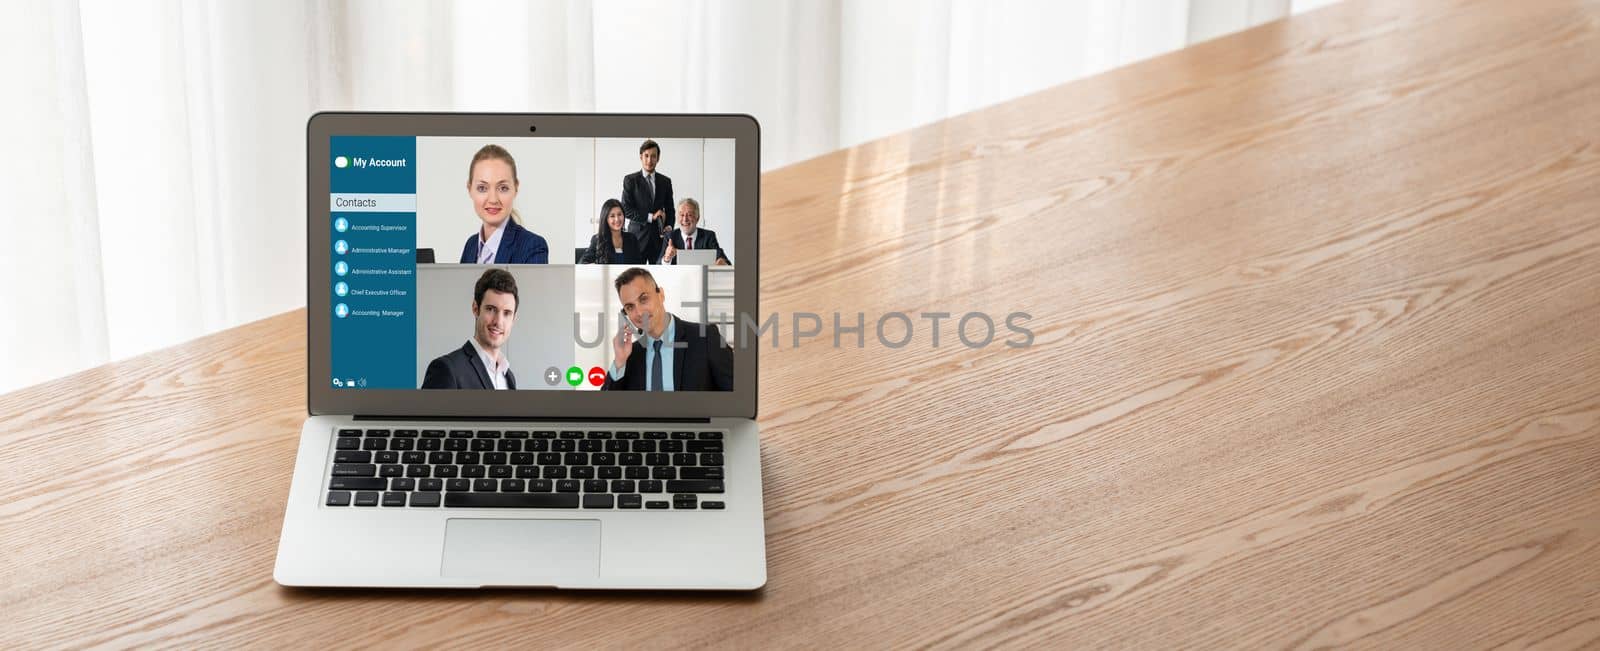 Business people on video conference for modish virtual group meeting by biancoblue